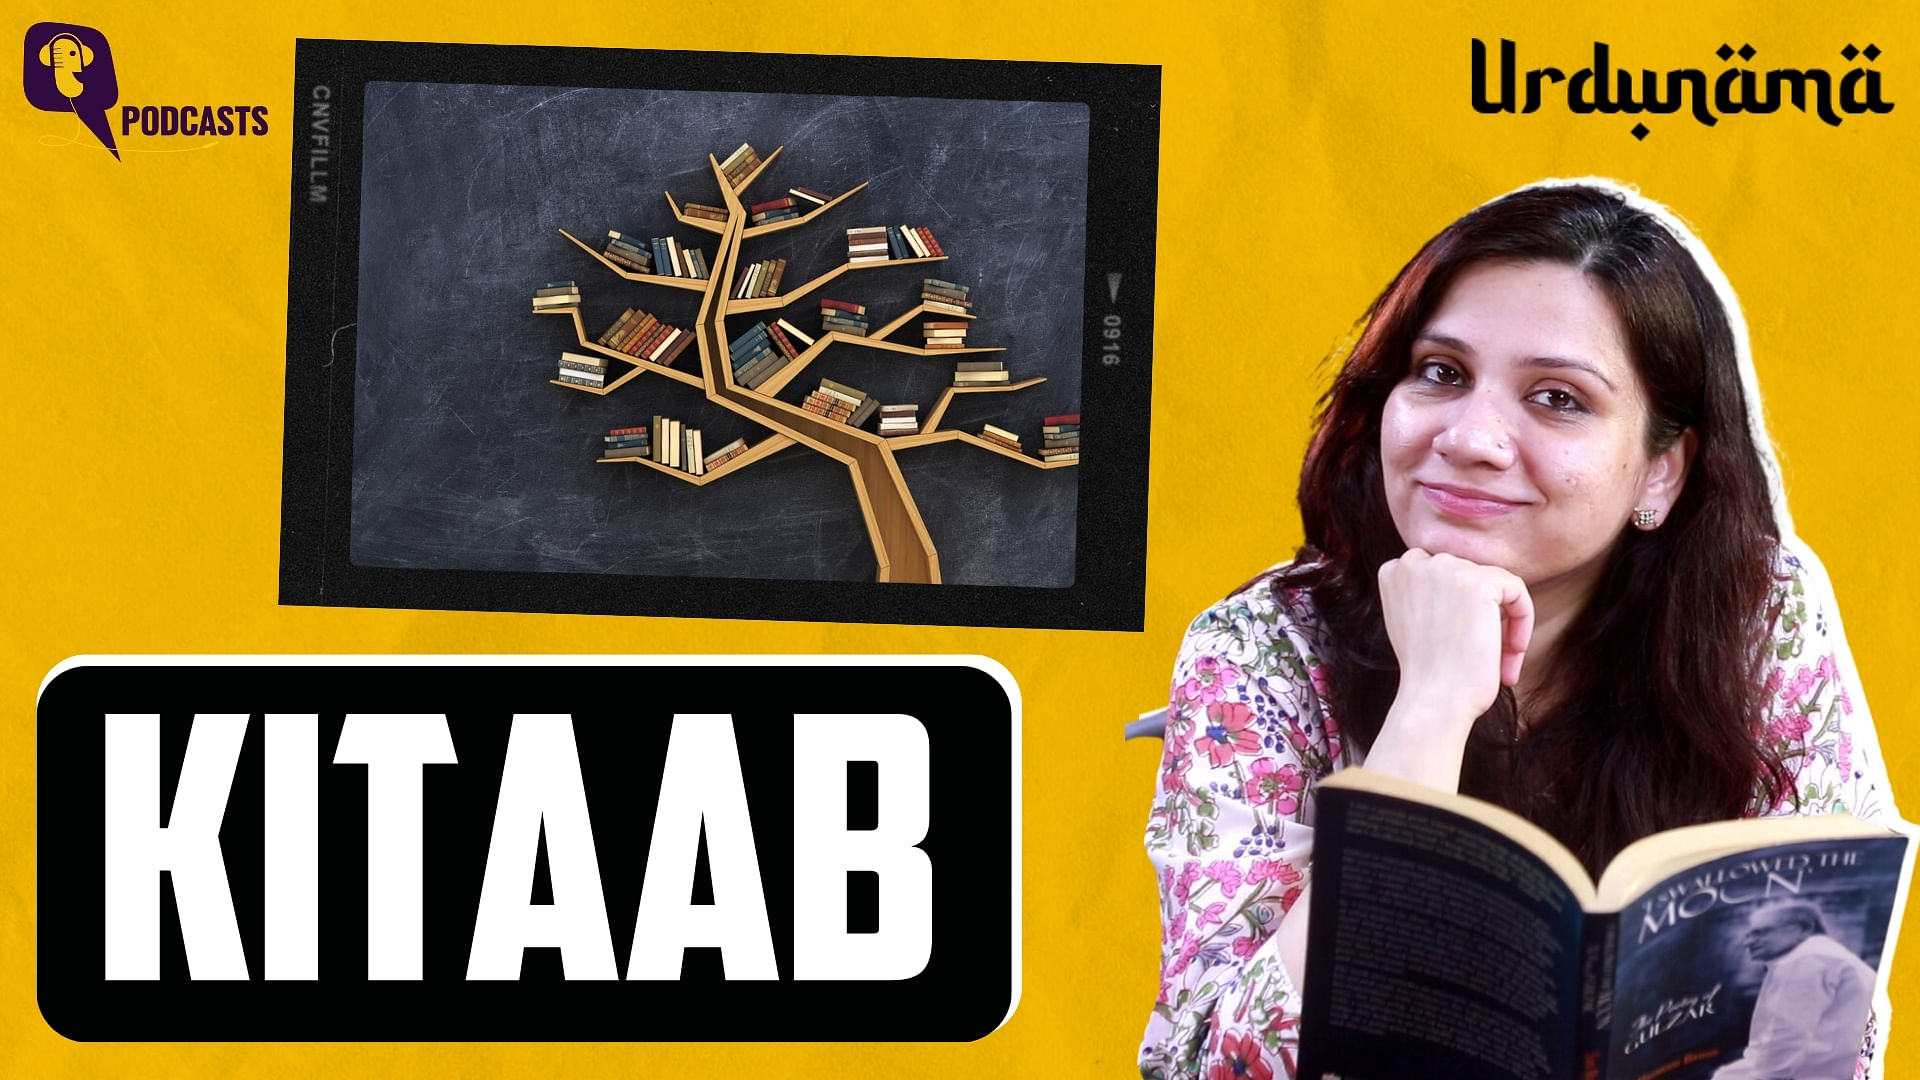 <div class="paragraphs"><p>In this episode of 'Urdunama', Fabeha talks about the Urdu word 'Kitaab'.</p></div>